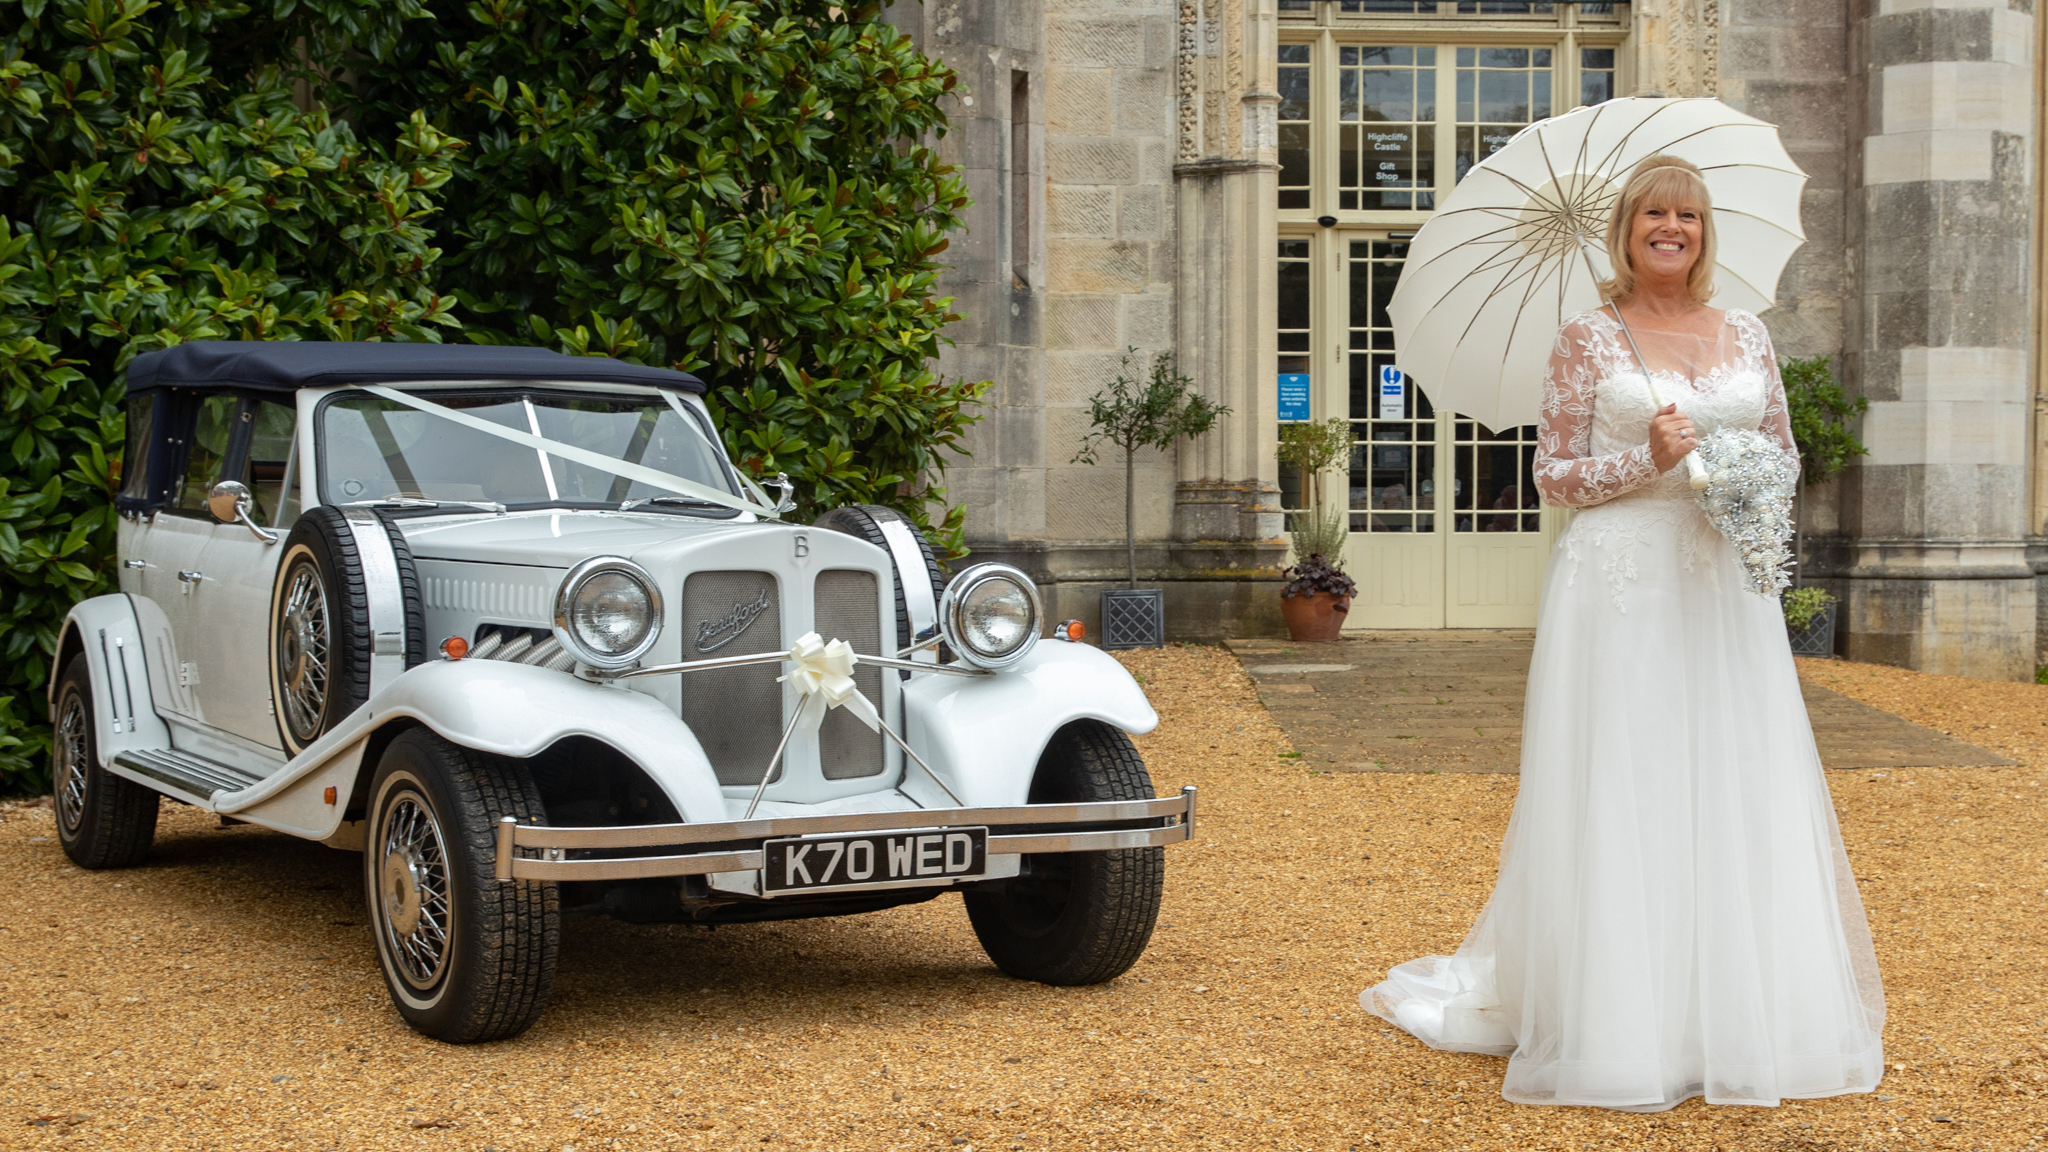 White vintage Beauford convertible with roof up decorated with white ribbon and bow at a local Tonbridge wedding. Smiling bride standing next to the vehicle with a white umbrella h